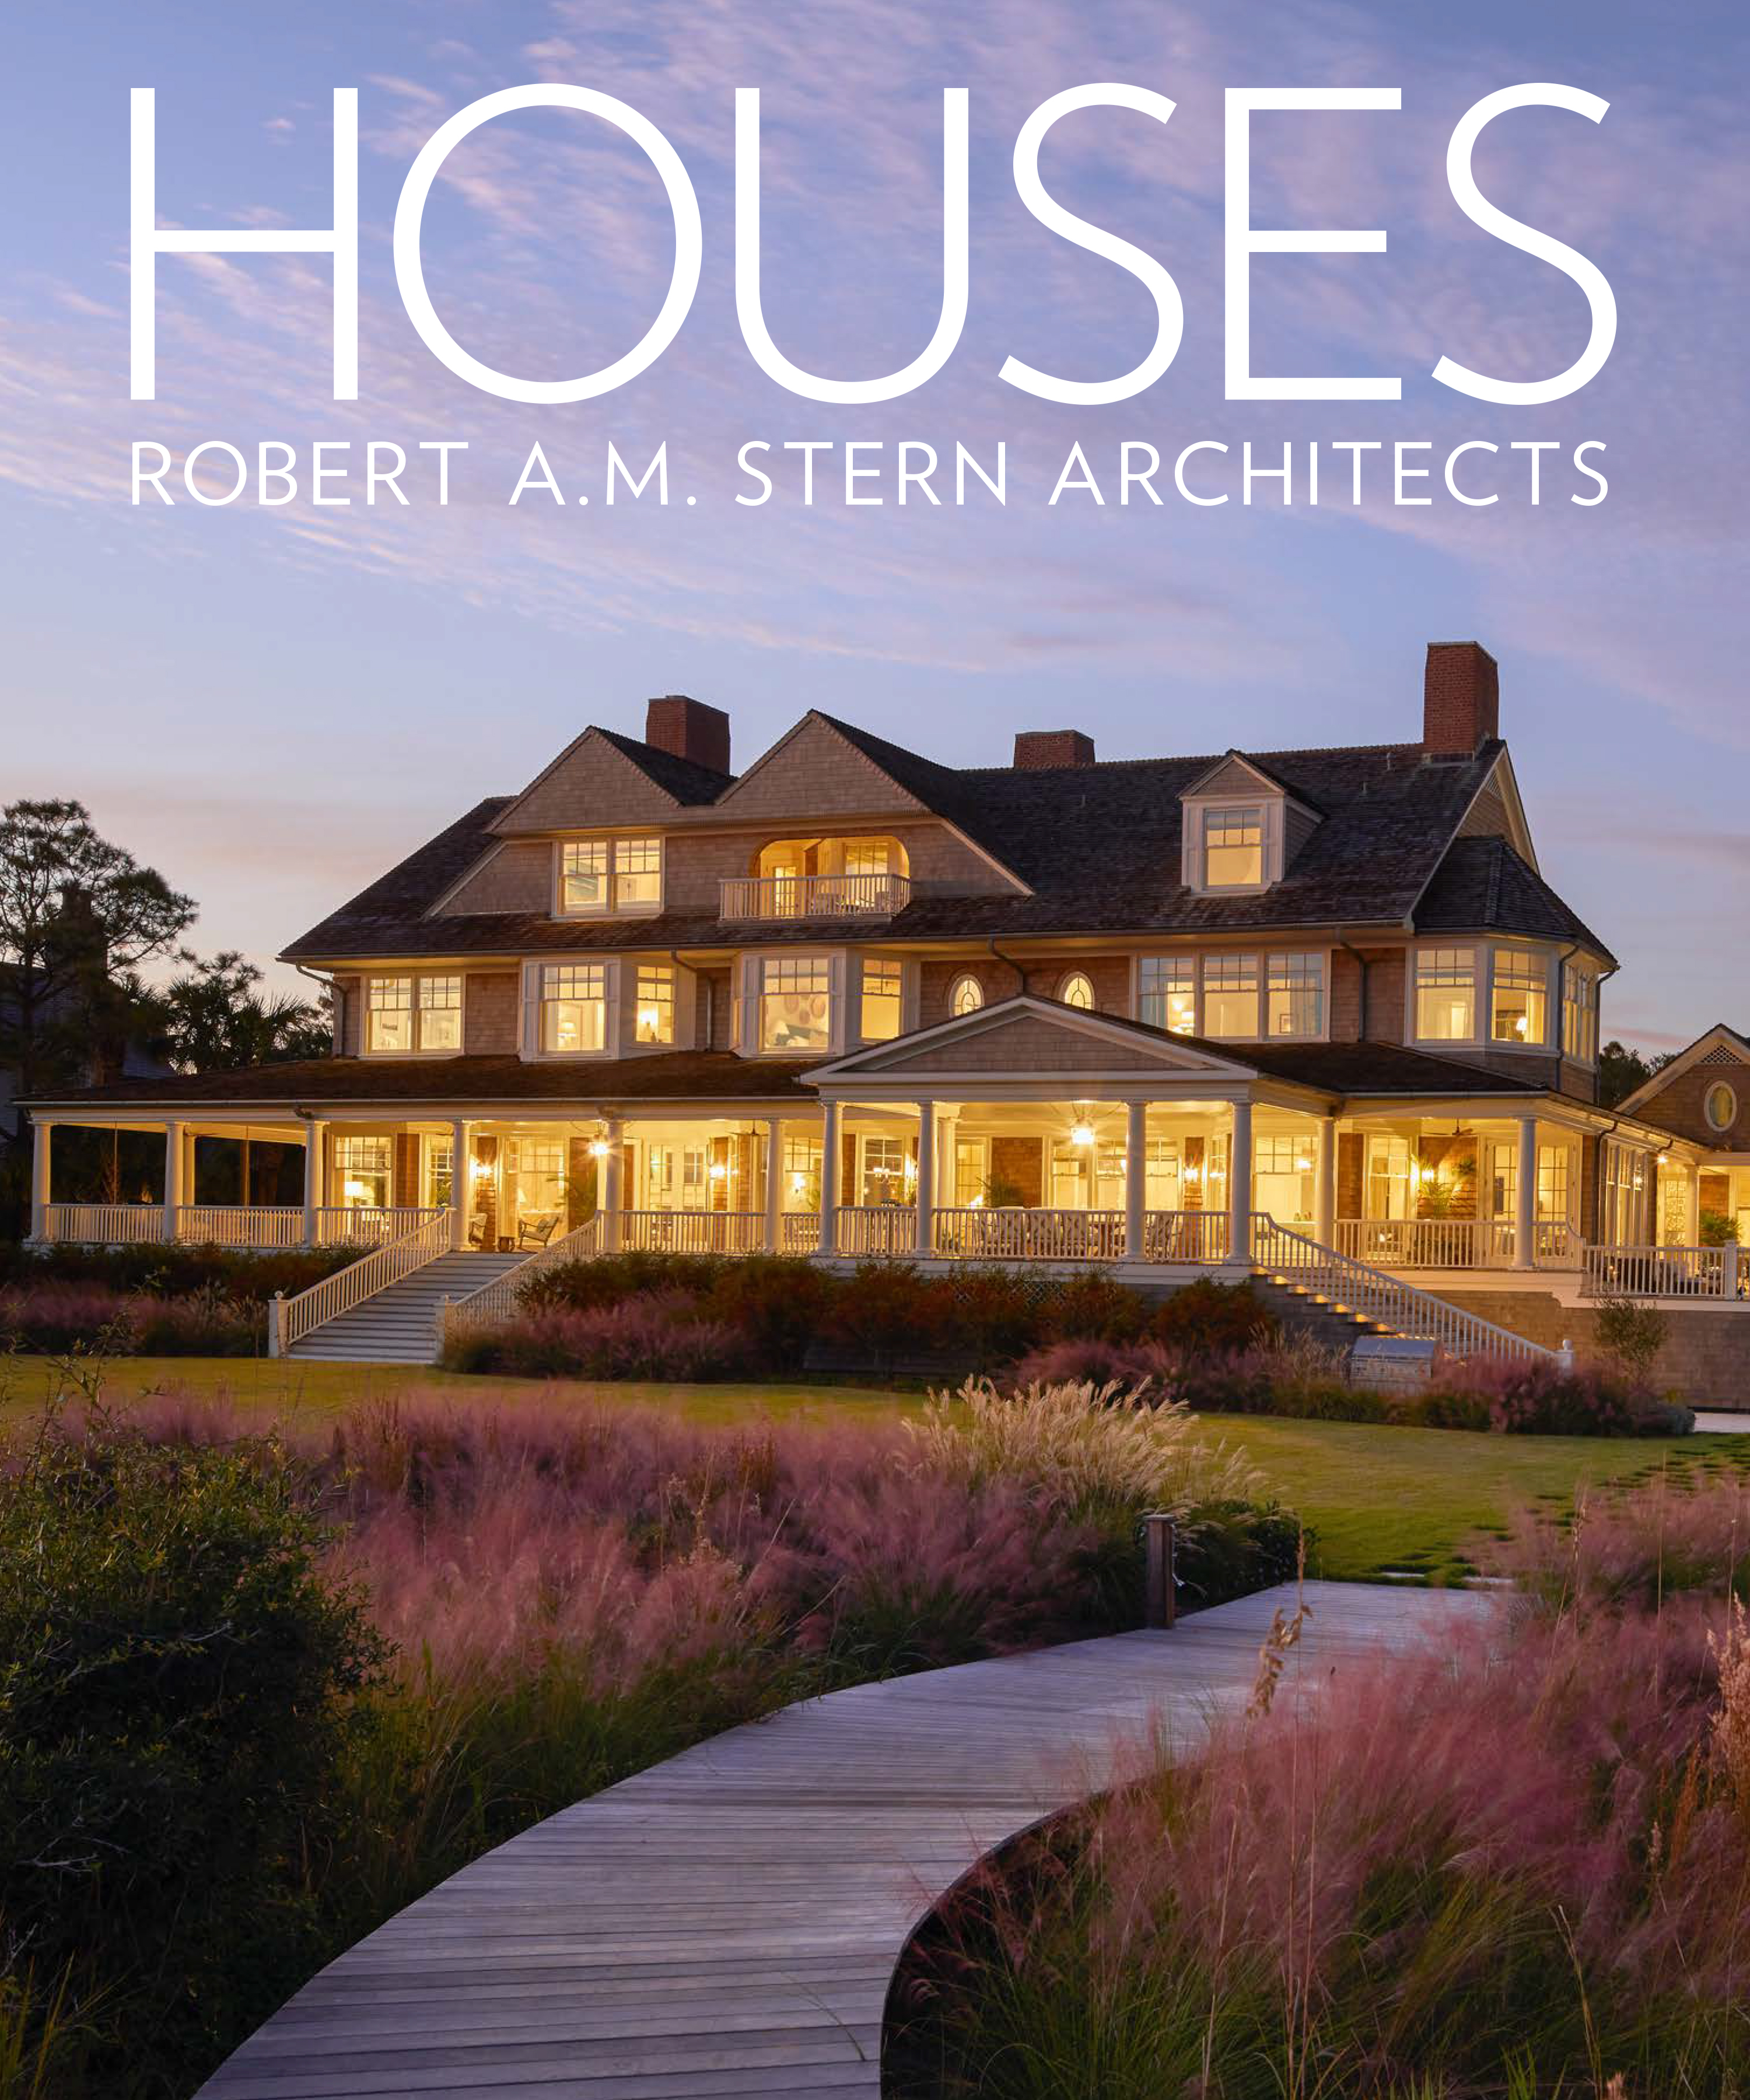 HOUSES: Robert A.M. Stern Architects